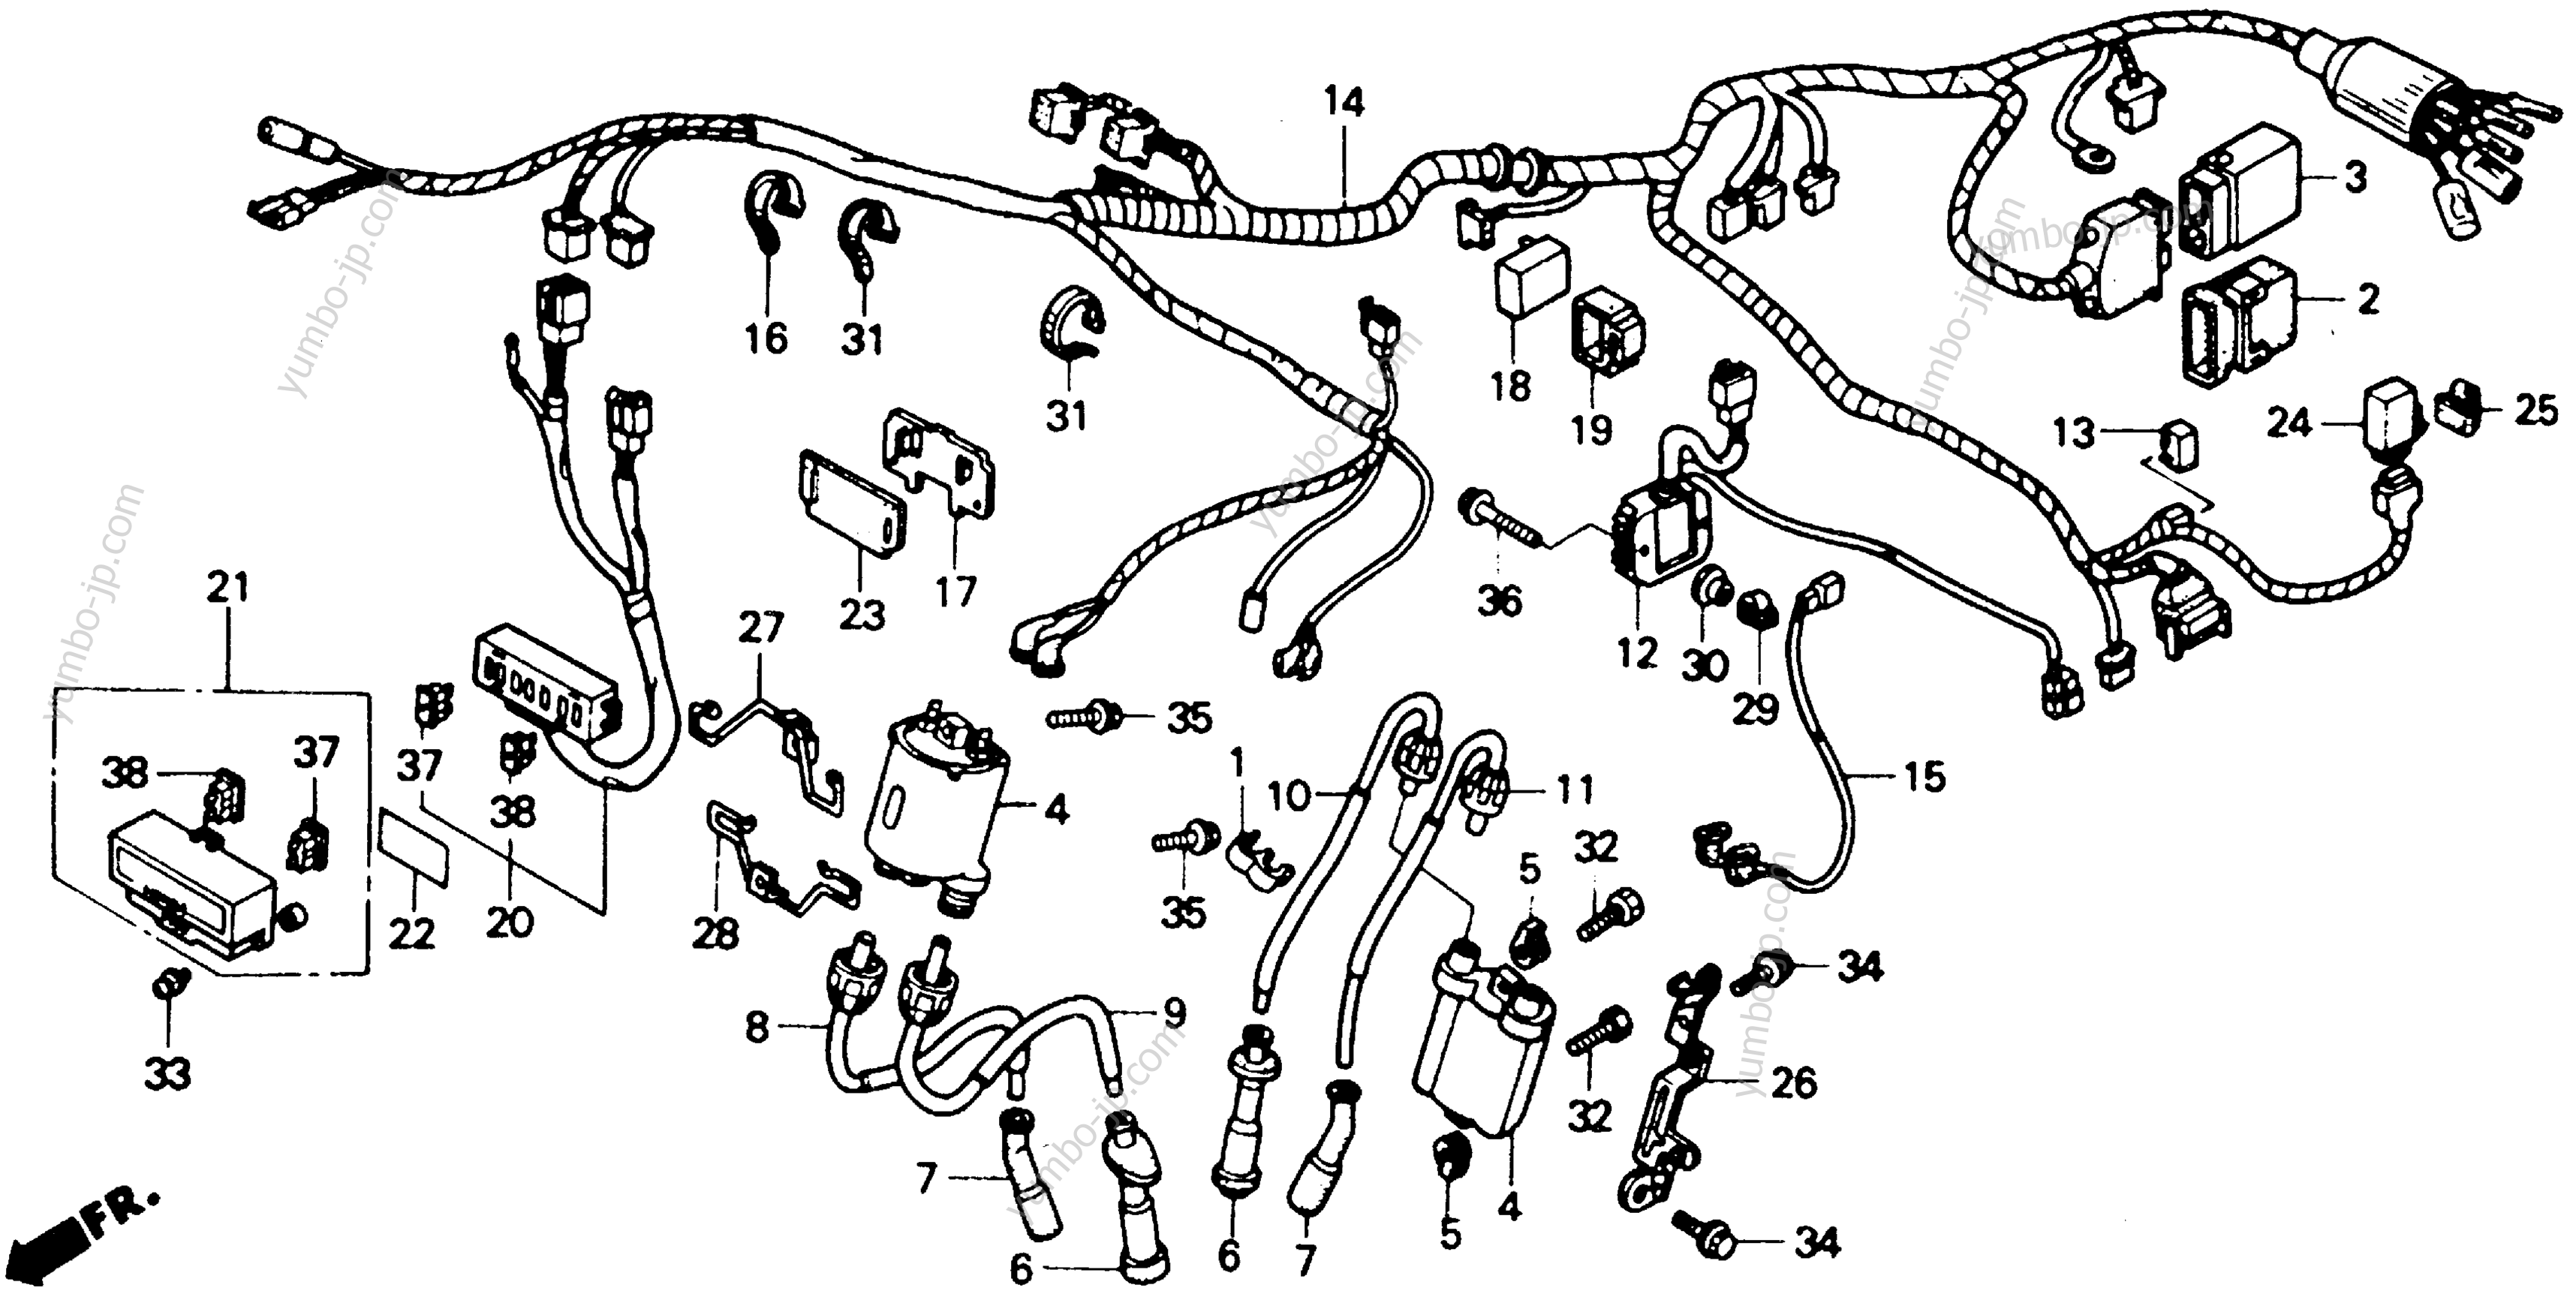 WIRE HARNESS for motorcycles HONDA NT650 AC 1988 year